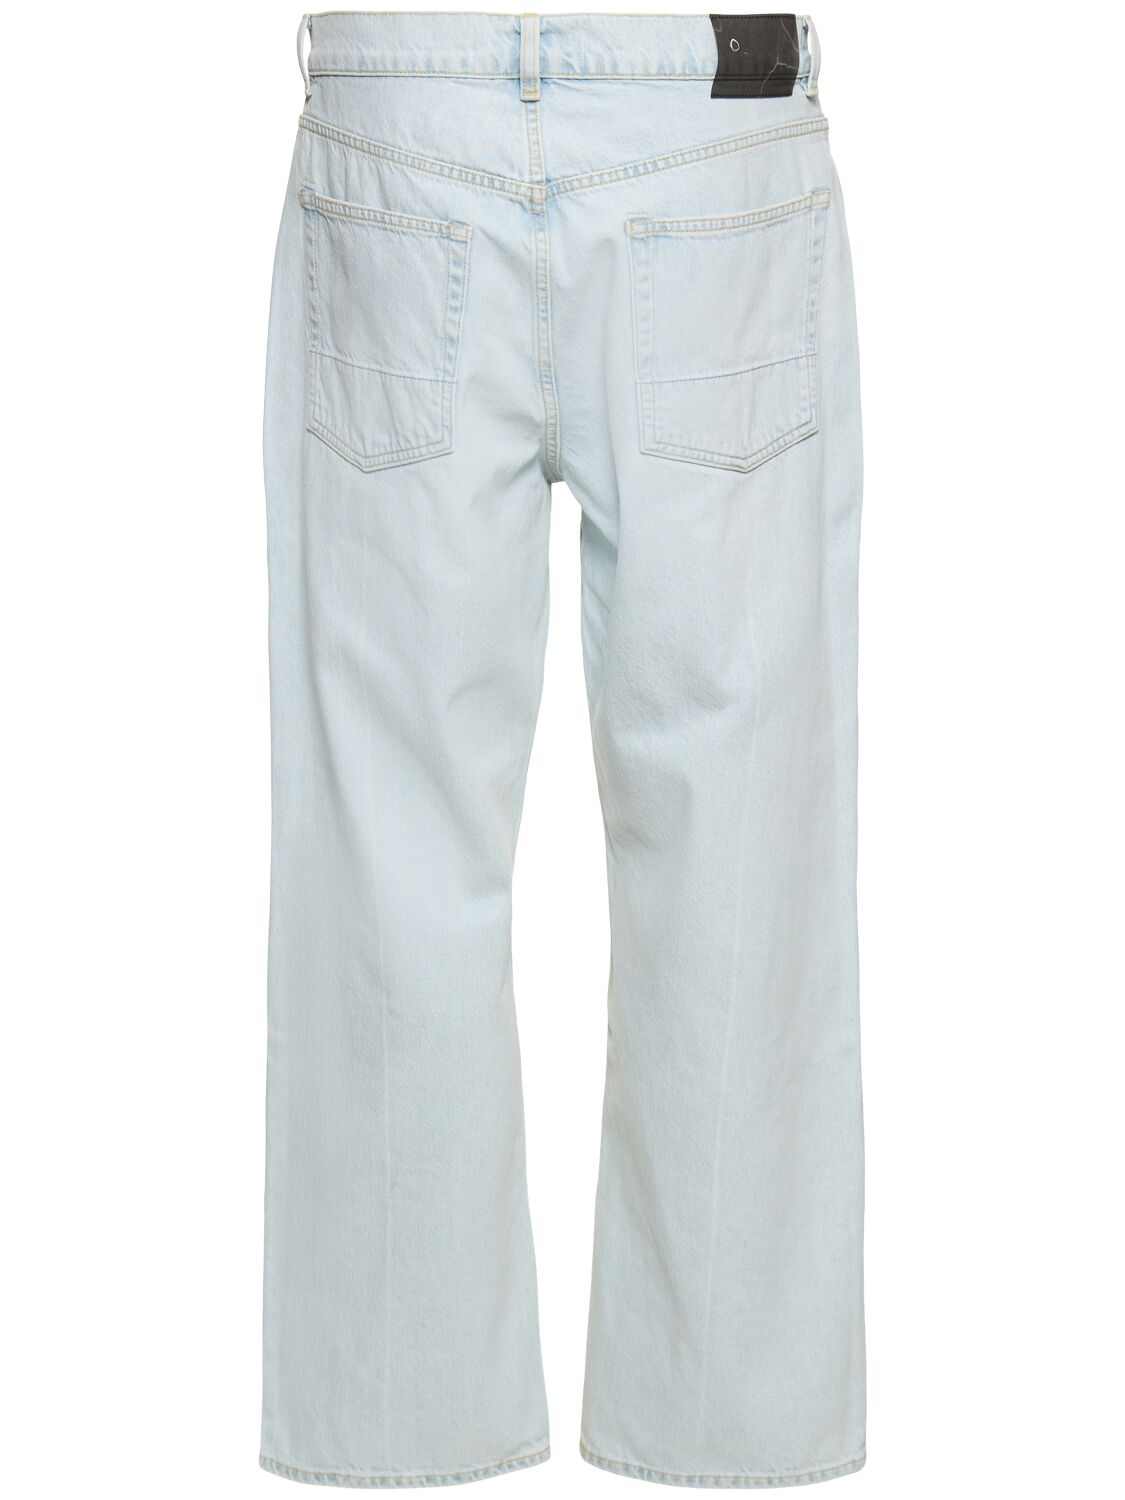 Shop Our Legacy 25.5cm Extended Third Cut Cotton Jeans In Light Blue